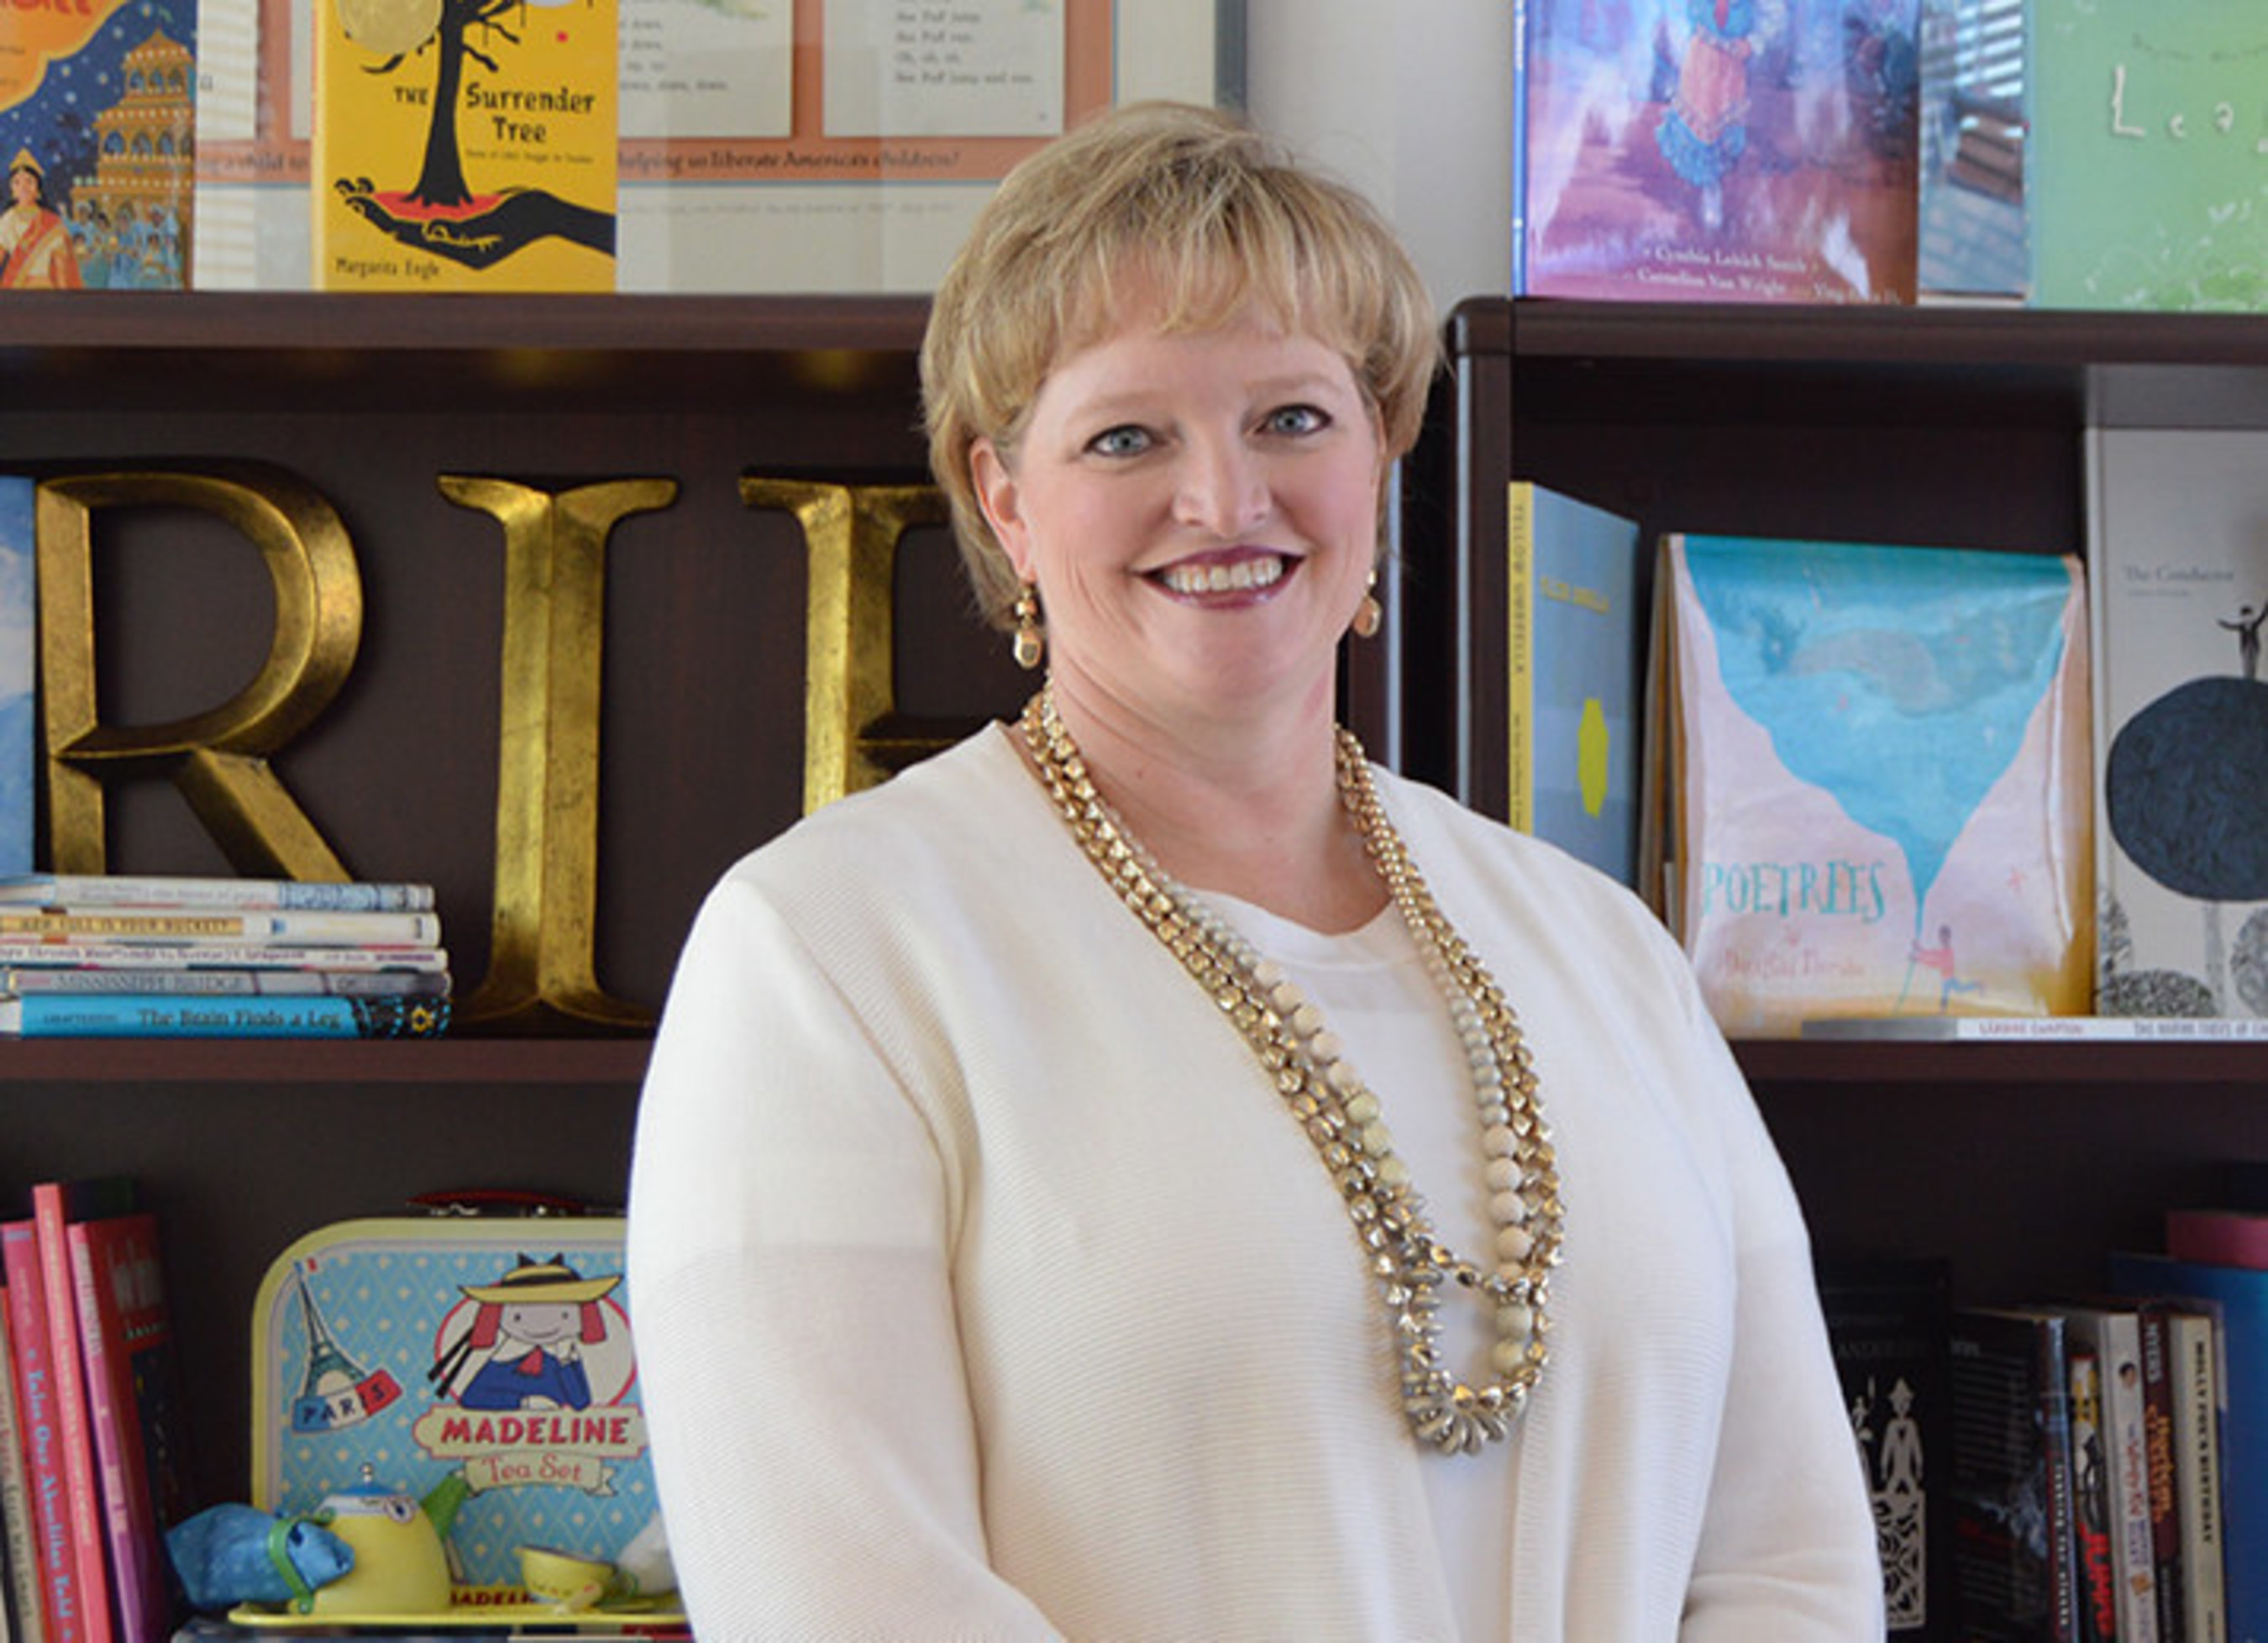 Alicia Levi is announced as the new President and CEO of Reading Is Fundamental